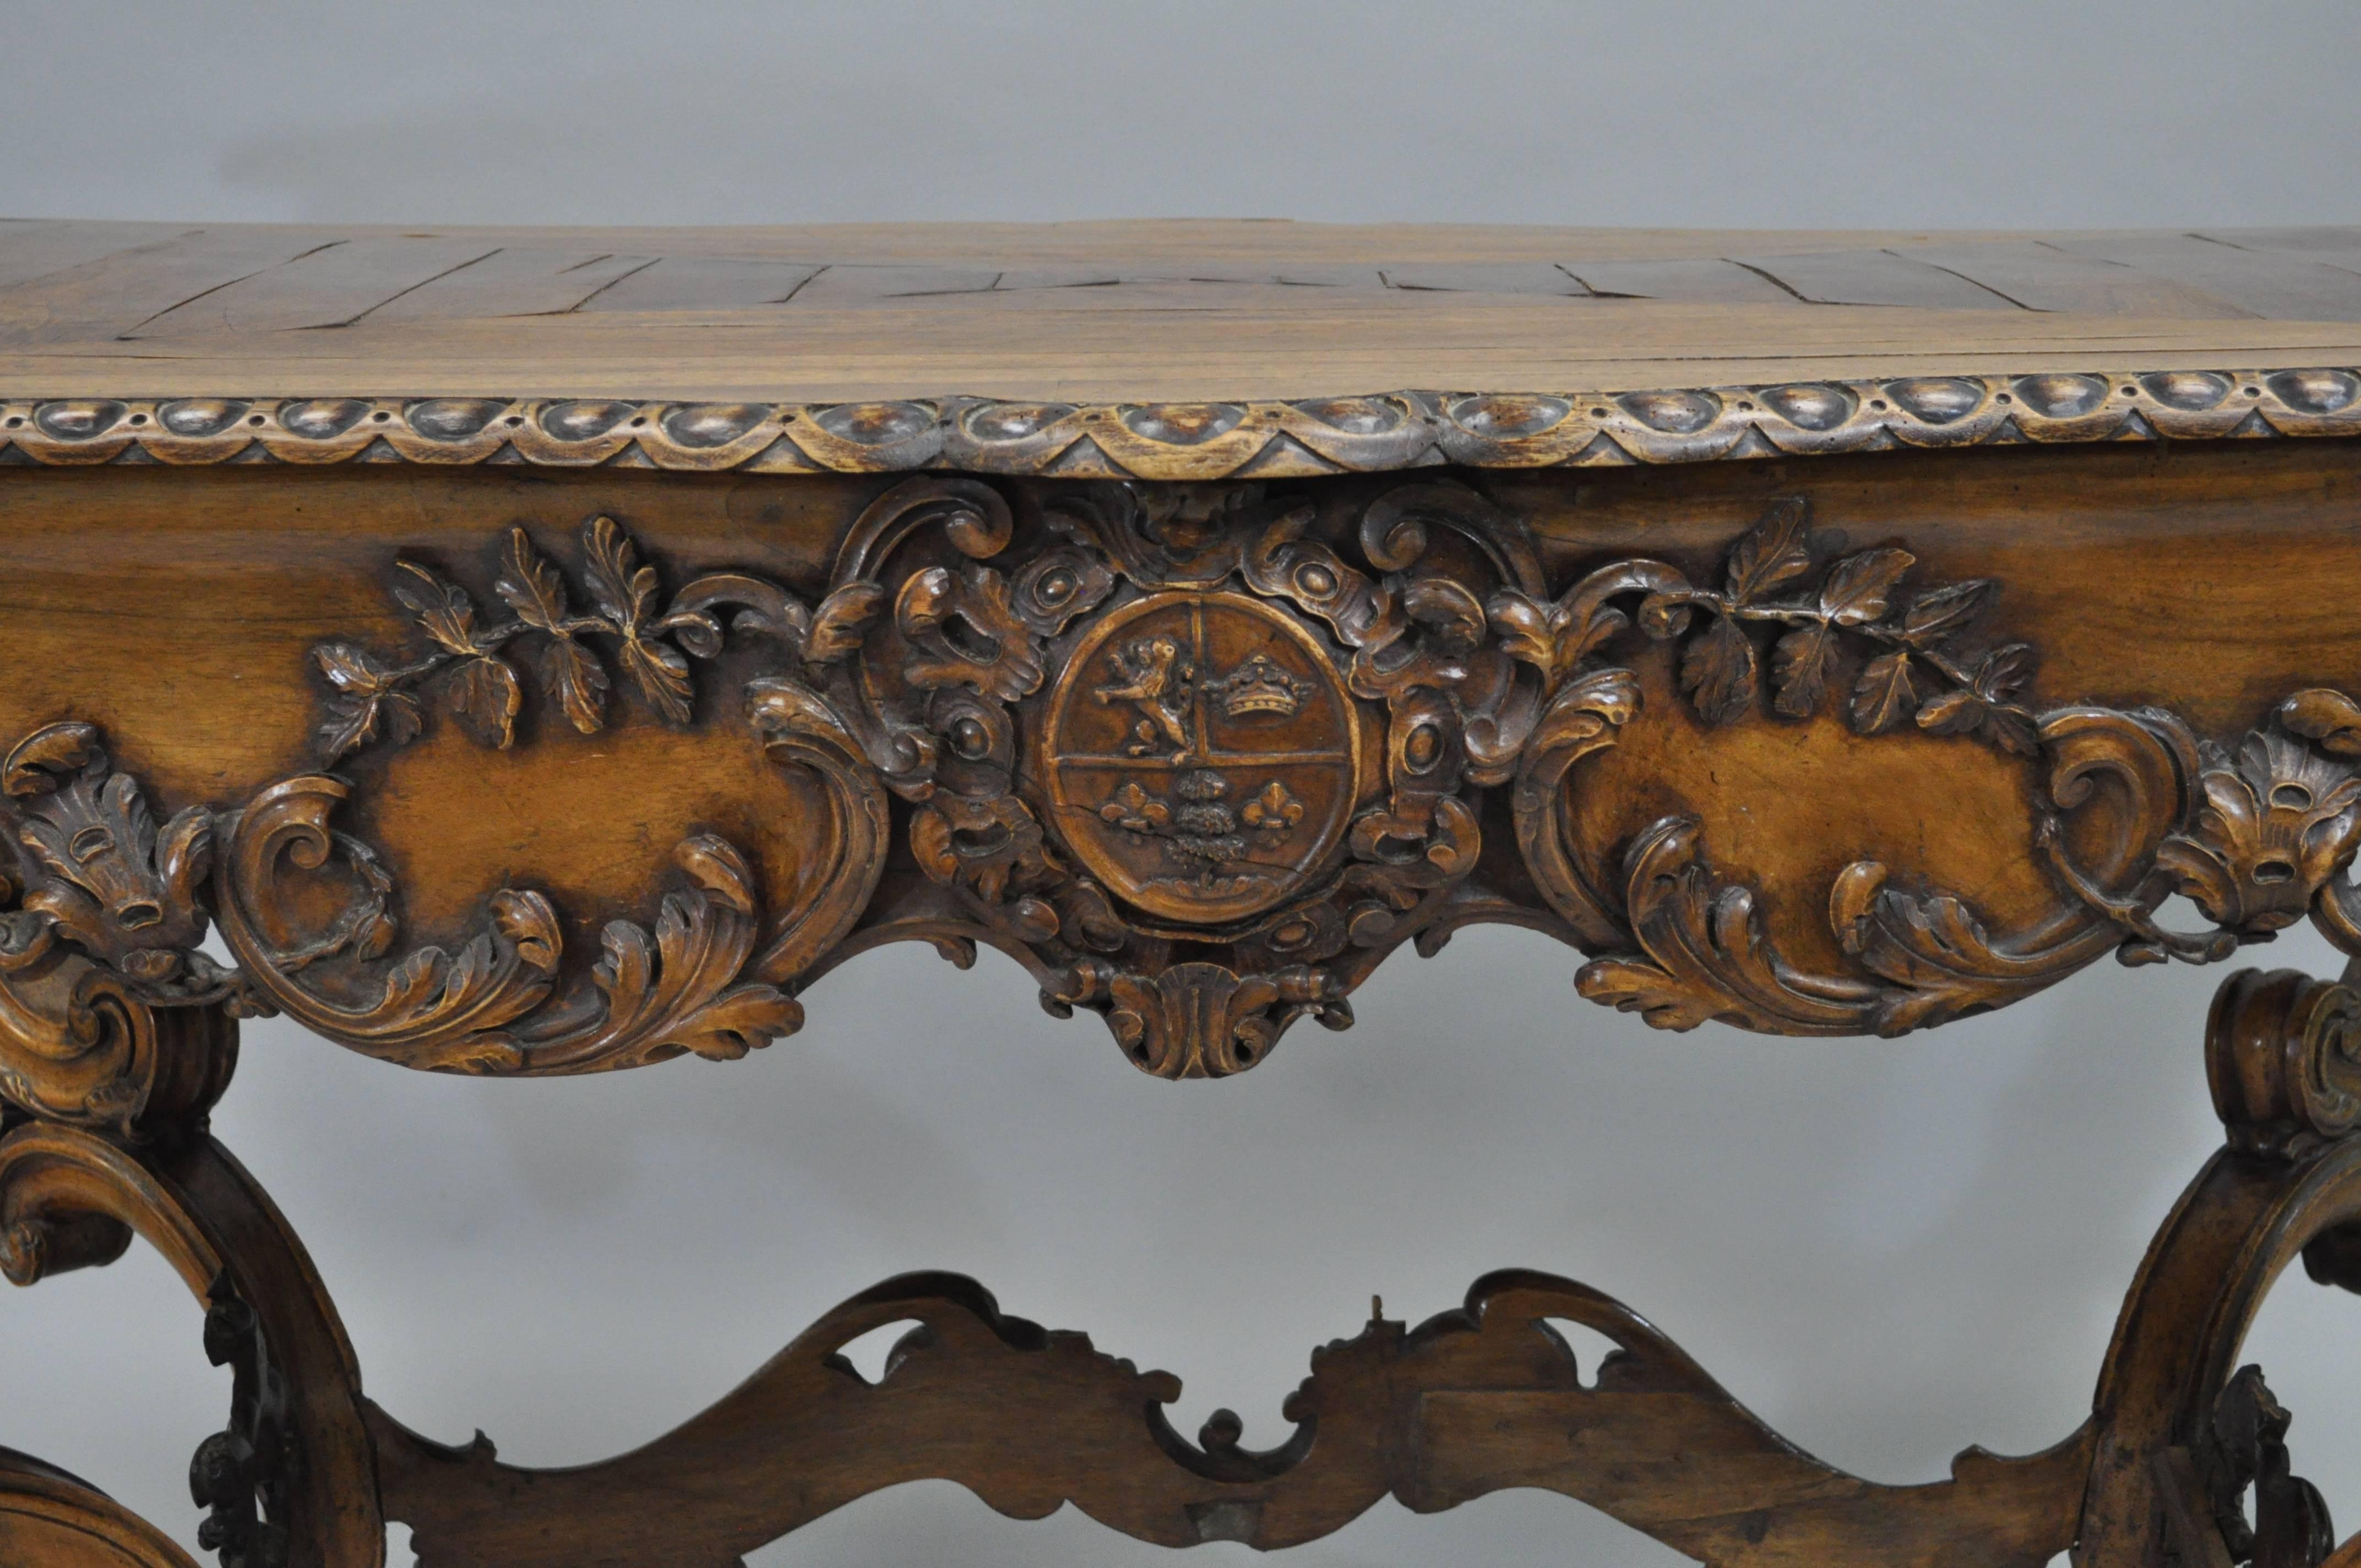 Ornate early 19th century Italian baroque carved walnut center table in the French Louis XV taste. Table features an impressive overall form with fine carvings throughout including the shapely acanthus form legs, stretcher base, plank inlaid walnut